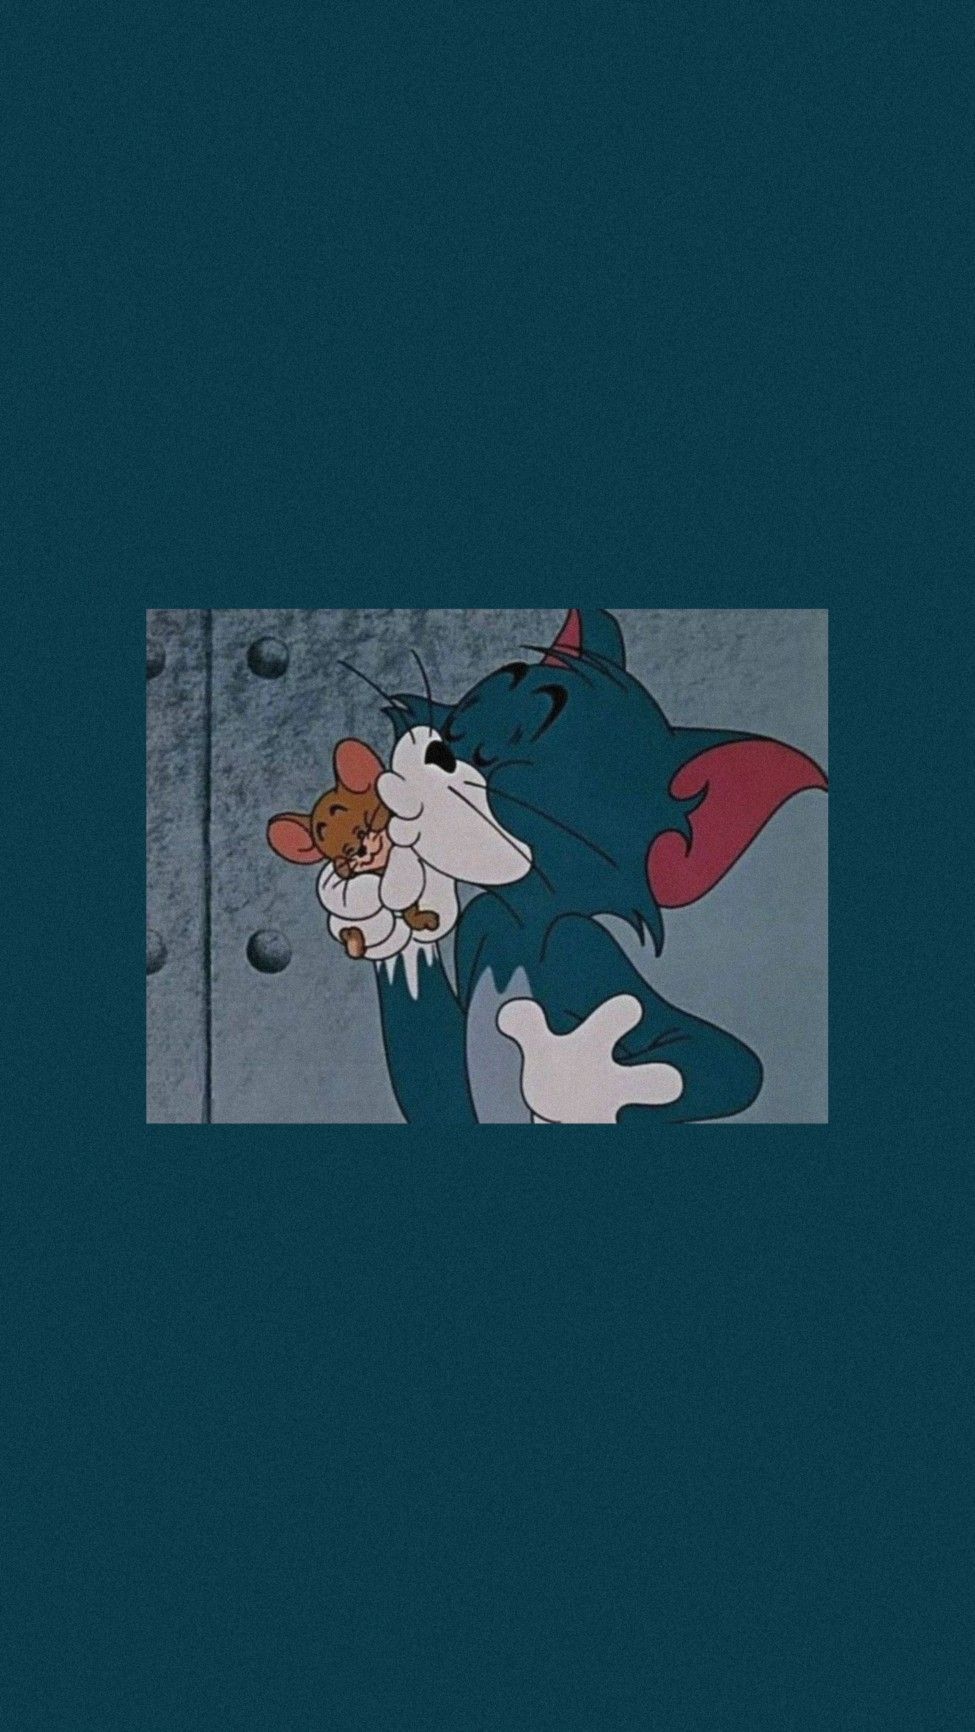 A cartoon cat with its mouth open - Tom and Jerry